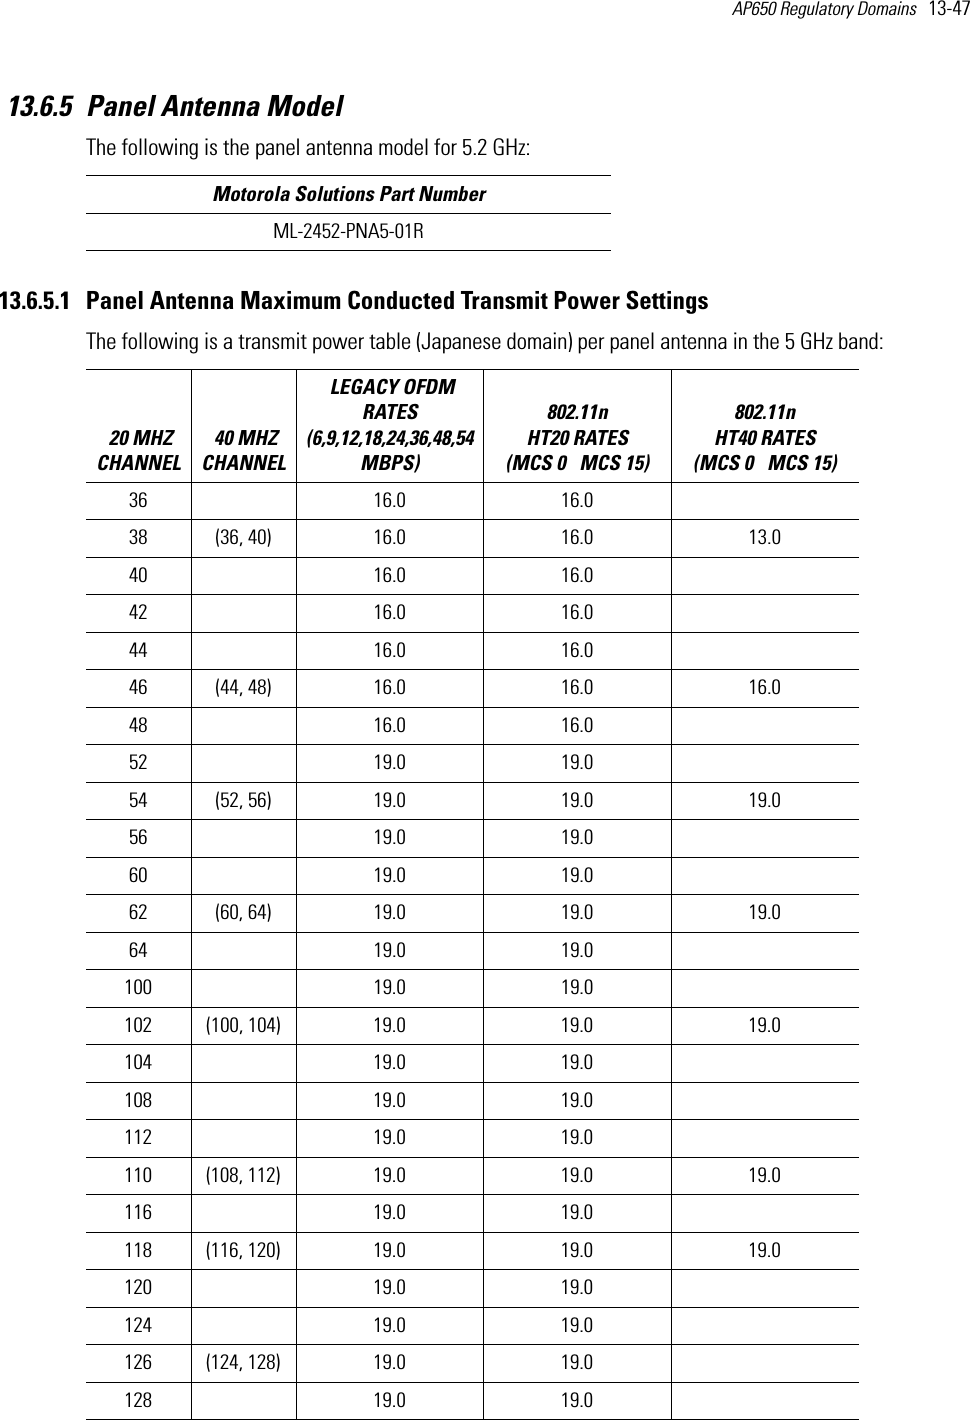 AP650 Regulatory Domains   13-47 13.6.5 Panel Antenna ModelThe following is the panel antenna model for 5.2 GHz:13.6.5.1 Panel Antenna Maximum Conducted Transmit Power SettingsThe following is a transmit power table (Japanese domain) per panel antenna in the 5 GHz band: Motorola Solutions Part NumberML-2452-PNA5-01R 20 MHZ CHANNEL 40 MHZ CHANNEL LEGACY OFDM RATES (6,9,12,18,24,36,48,54 MBPS) 802.11n HT20 RATES (MCS 0   MCS 15)802.11n HT40 RATES (MCS 0   MCS 15) 36  16.0 16.0  38 (36, 40) 16.0 16.0 13.0 40  16.0 16.0  42  16.0 16.0  44  16.0 16.0  46 (44, 48) 16.0 16.0 16.048  16.0 16.0  52  19.0 19.0  54 (52, 56) 19.0 19.0 19.056  19.0 19.0  60  19.0 19.0  62 (60, 64) 19.0 19.0 19.064  19.0 19.0  100  19.0 19.0  102 (100, 104) 19.0 19.0 19.0104  19.0 19.0  108  19.0 19.0  112  19.0 19.0  110 (108, 112) 19.0 19.0 19.0116  19.0 19.0  118 (116, 120) 19.0 19.0 19.0120  19.0 19.0  124  19.0 19.0  126 (124, 128) 19.0 19.0128  19.0 19.0  